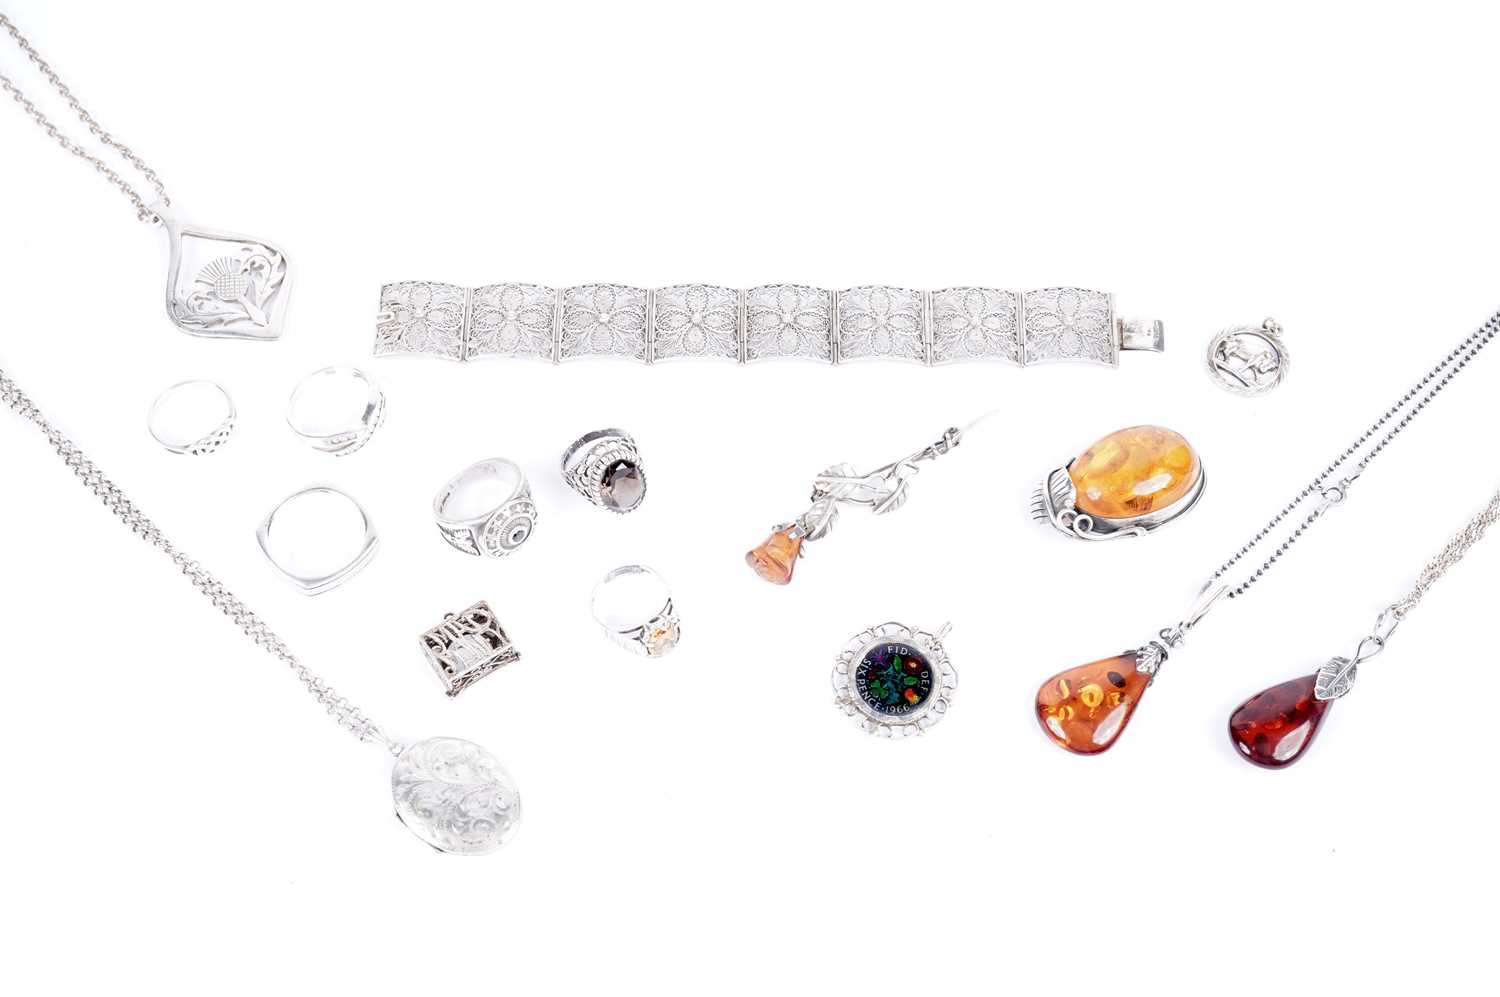 A selection of silver and costume jewellery